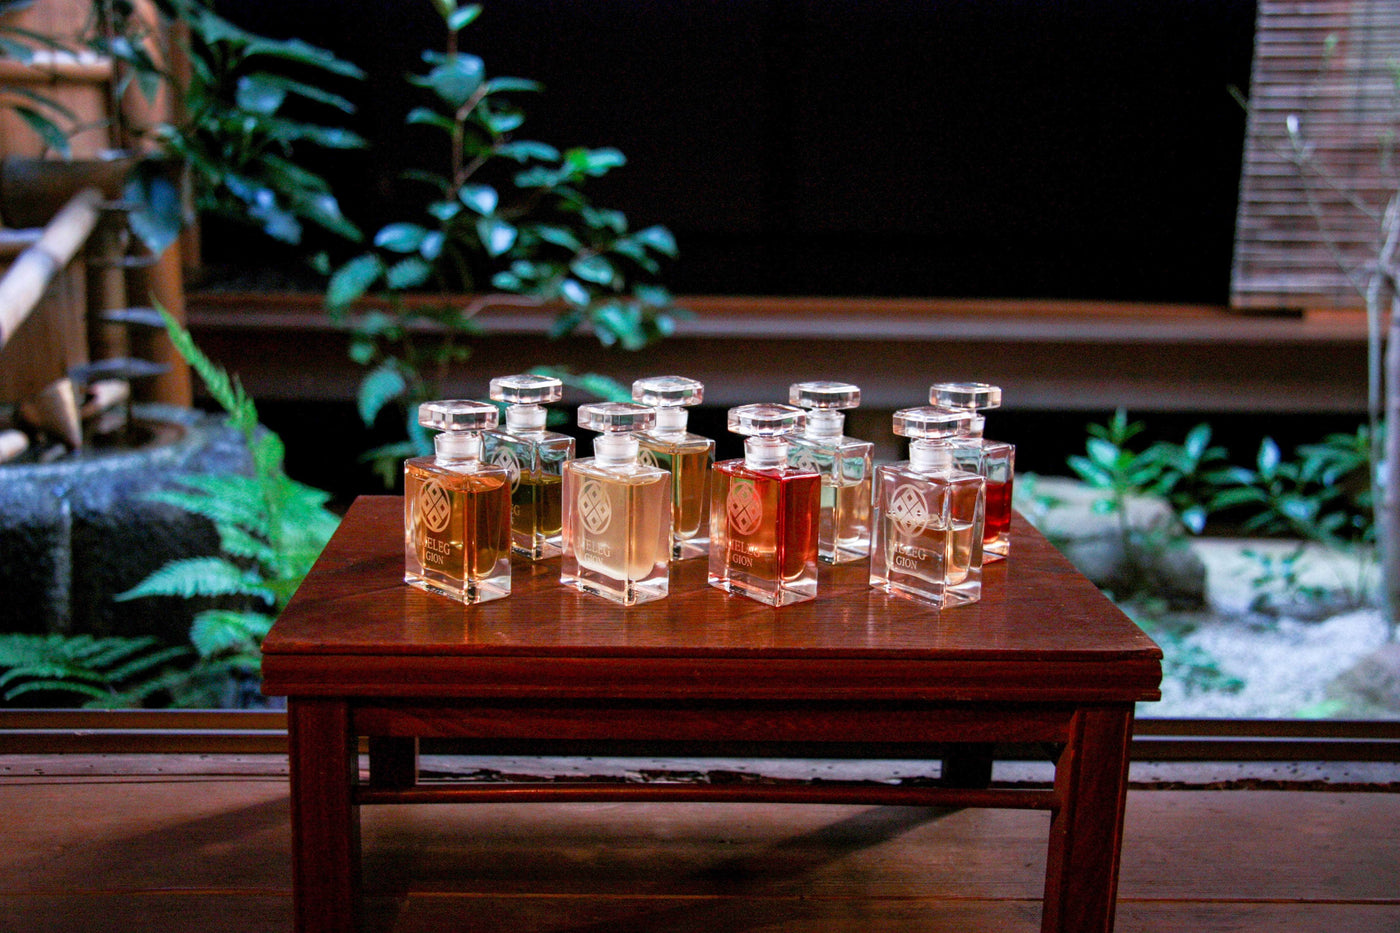 melegperfumes.com no alcohol Perfumes Gifted to Geisha in Kyoto, Japan "The Winter Rose" GION ATTAR 15ml (25% Pure Oils)